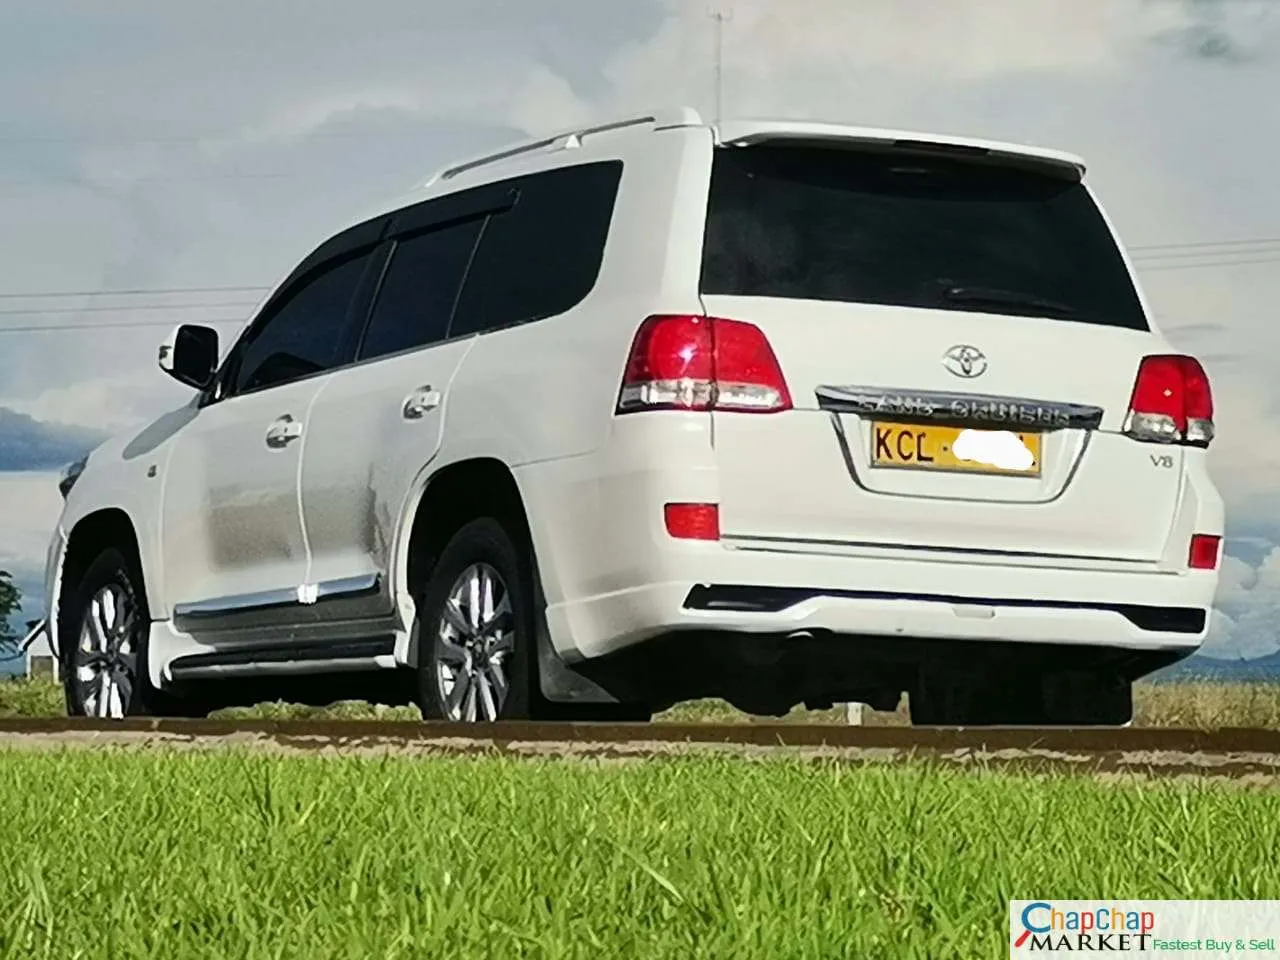 Toyota Land cruiser V8 For Sale in Kenya 202 3.3M Only SUNROOF LEATHER TRADE IN OK EXCLUSIVE